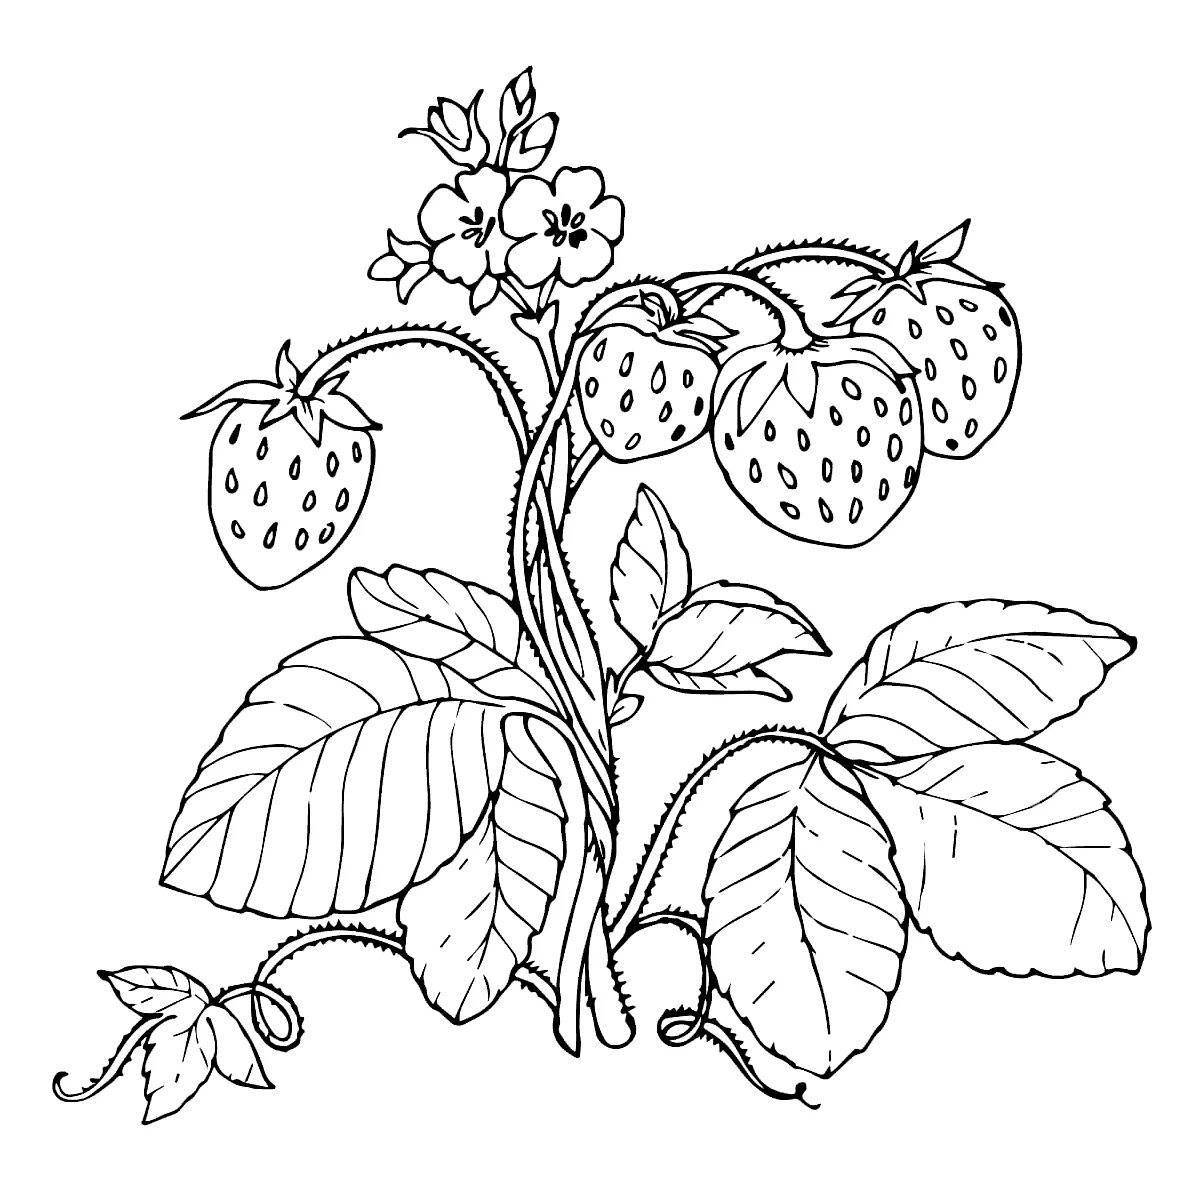 Fruit strawberry coloring book